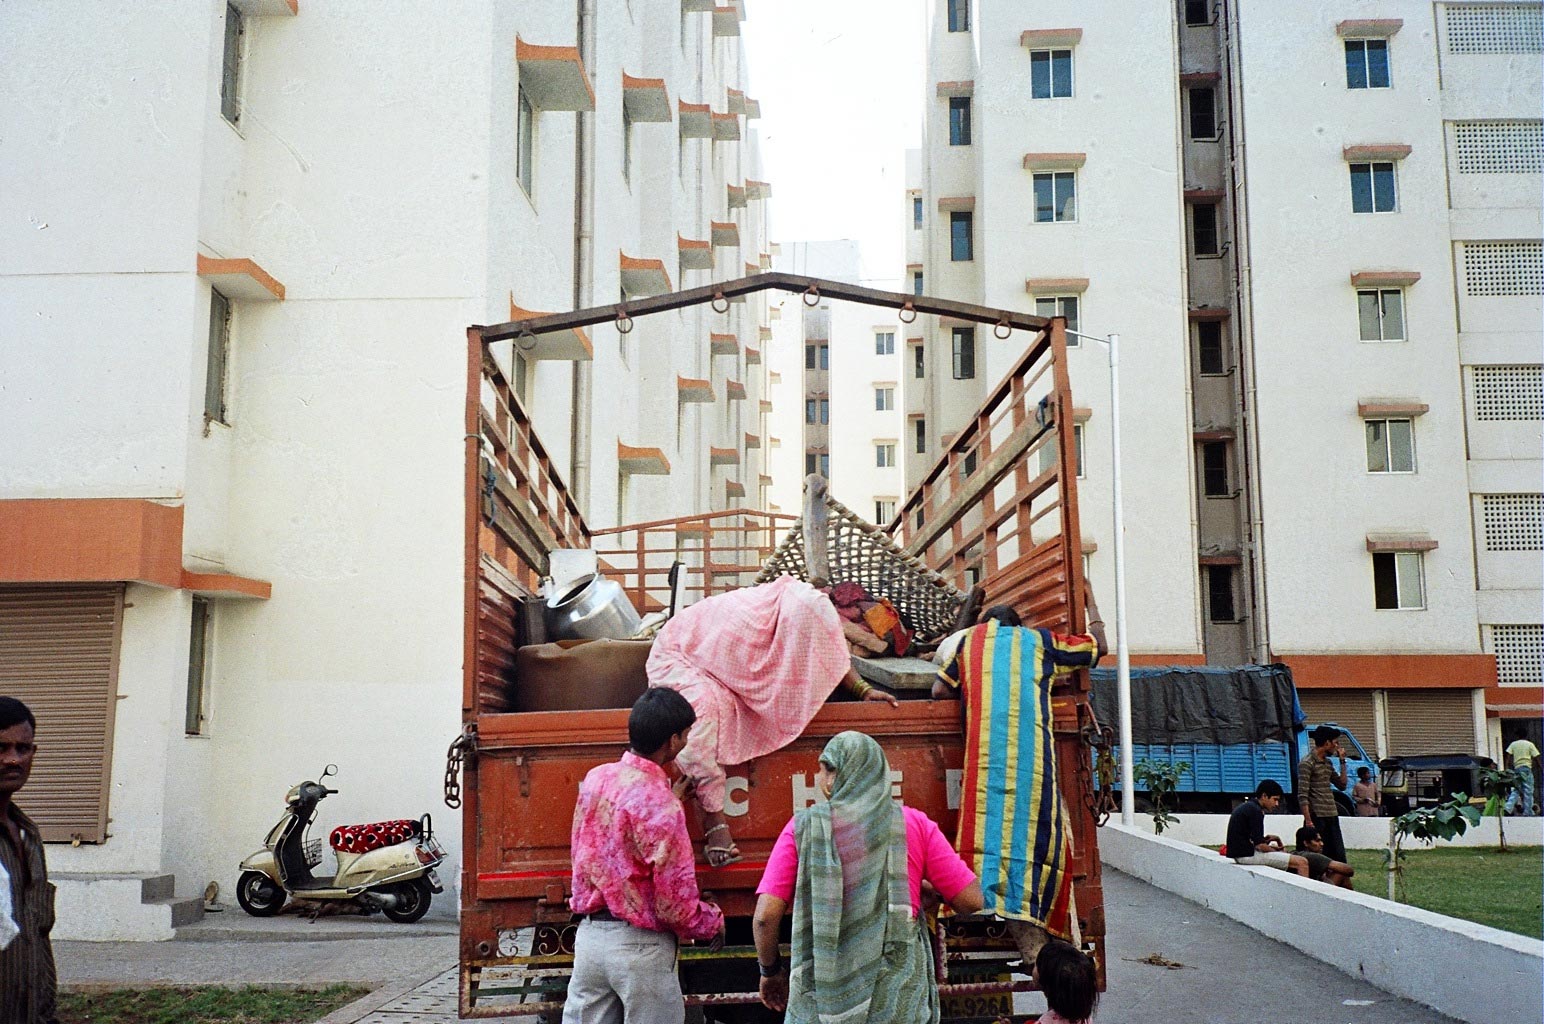 People moving into their new homes at Vashi Naka, Mumbai from settlements near the Railway tracks as part of the resettlement and rehabilitation program under the Mumbai Urban Transport Project (MUTP).